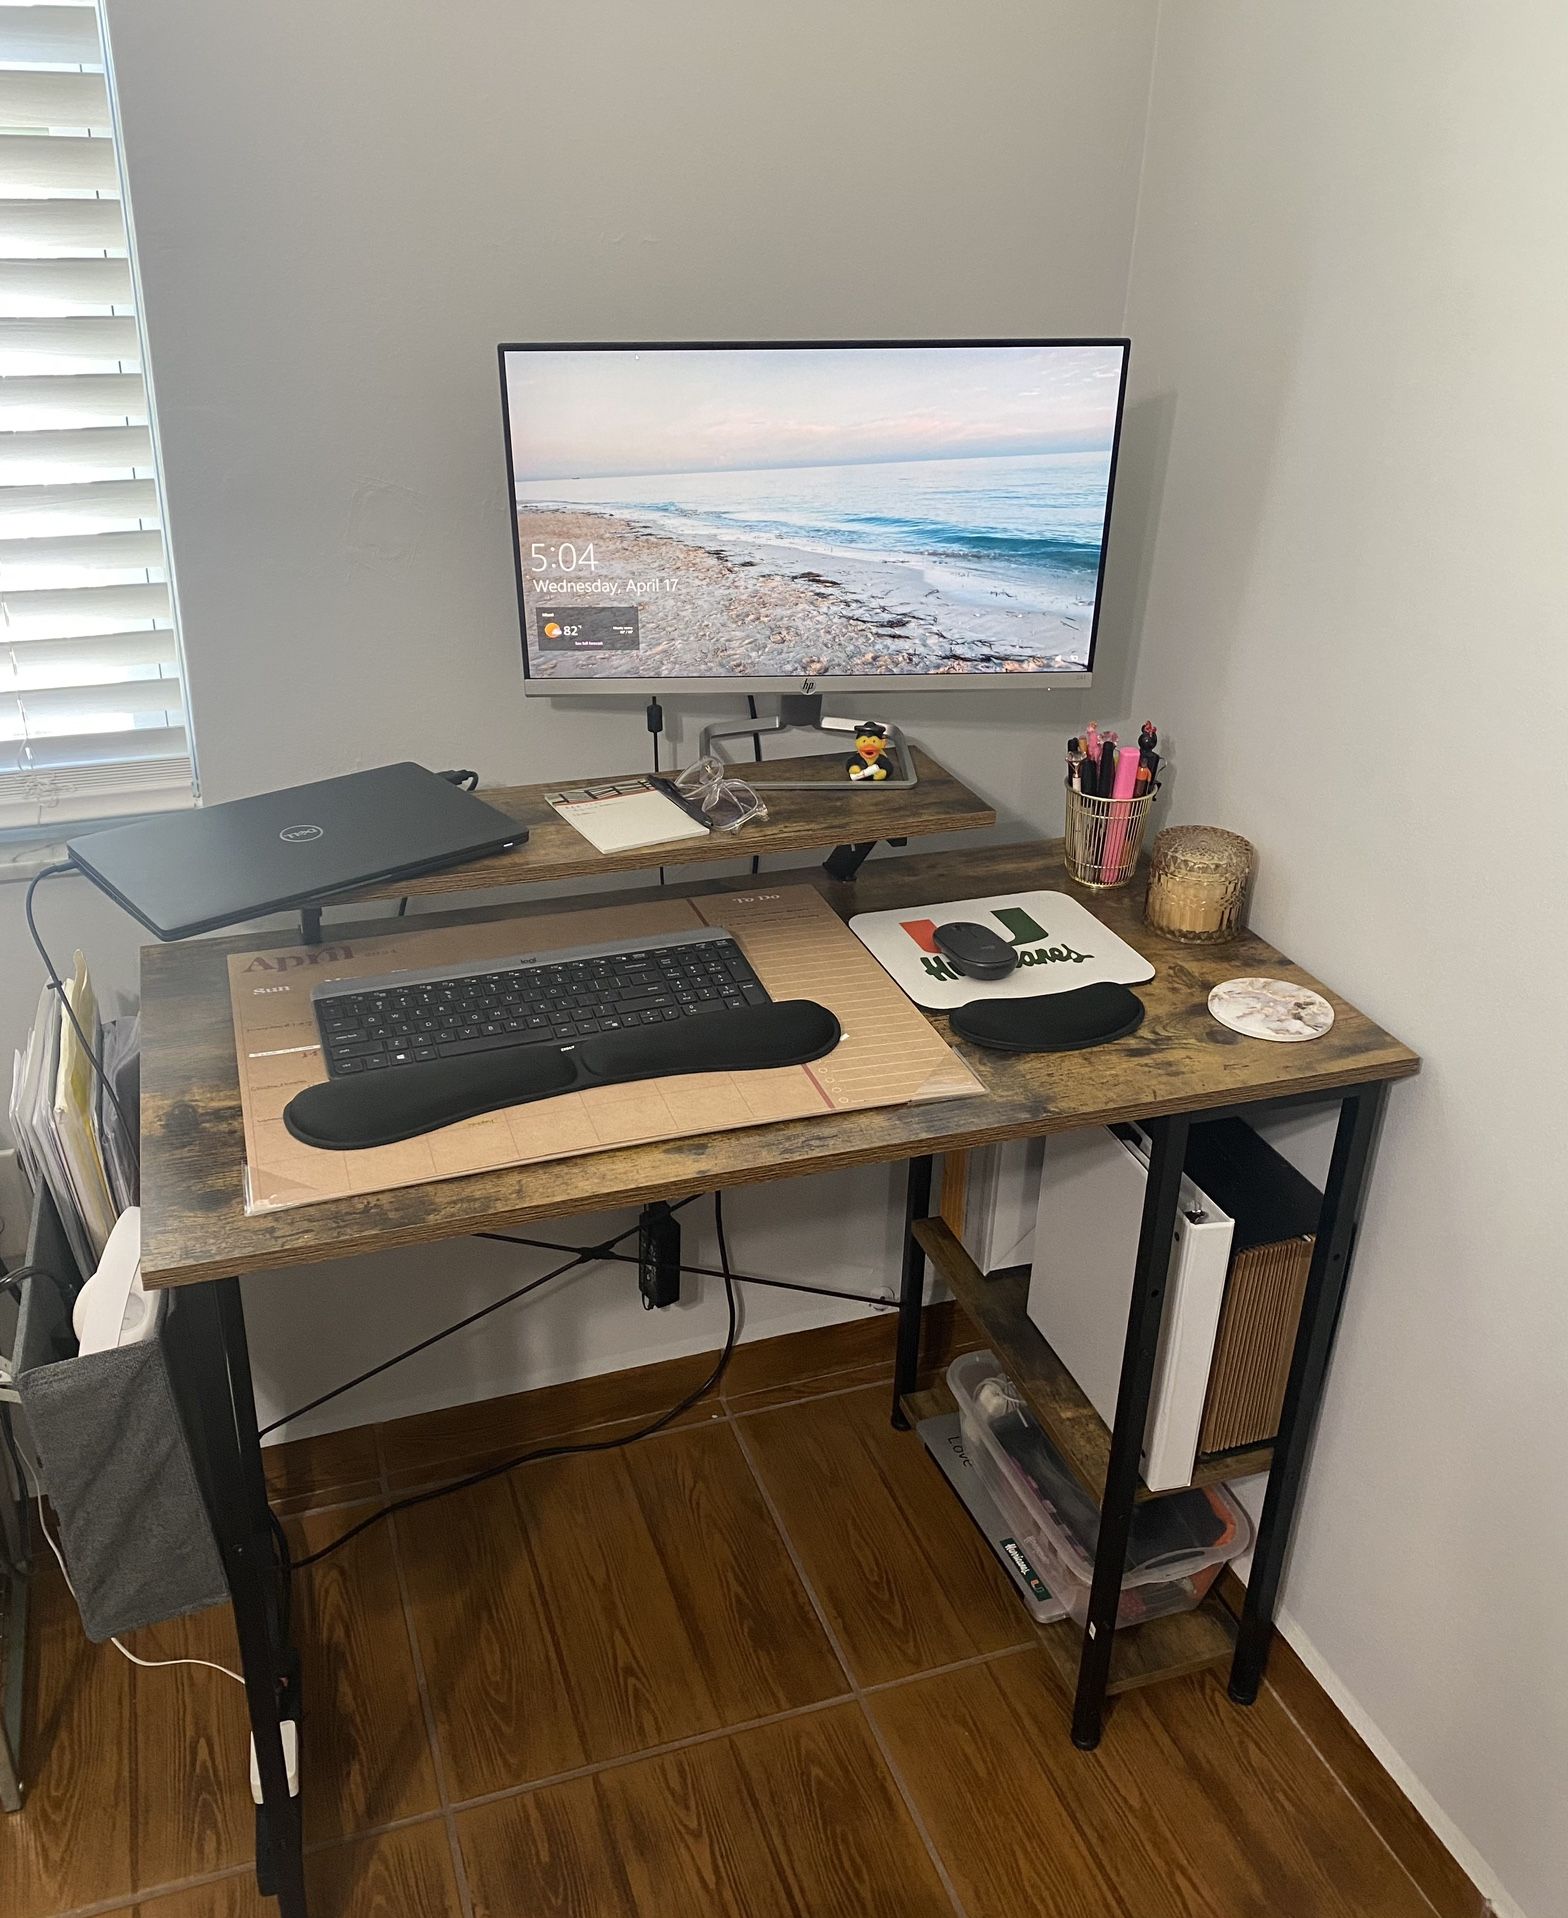 Computer Desk with Monitor Stand